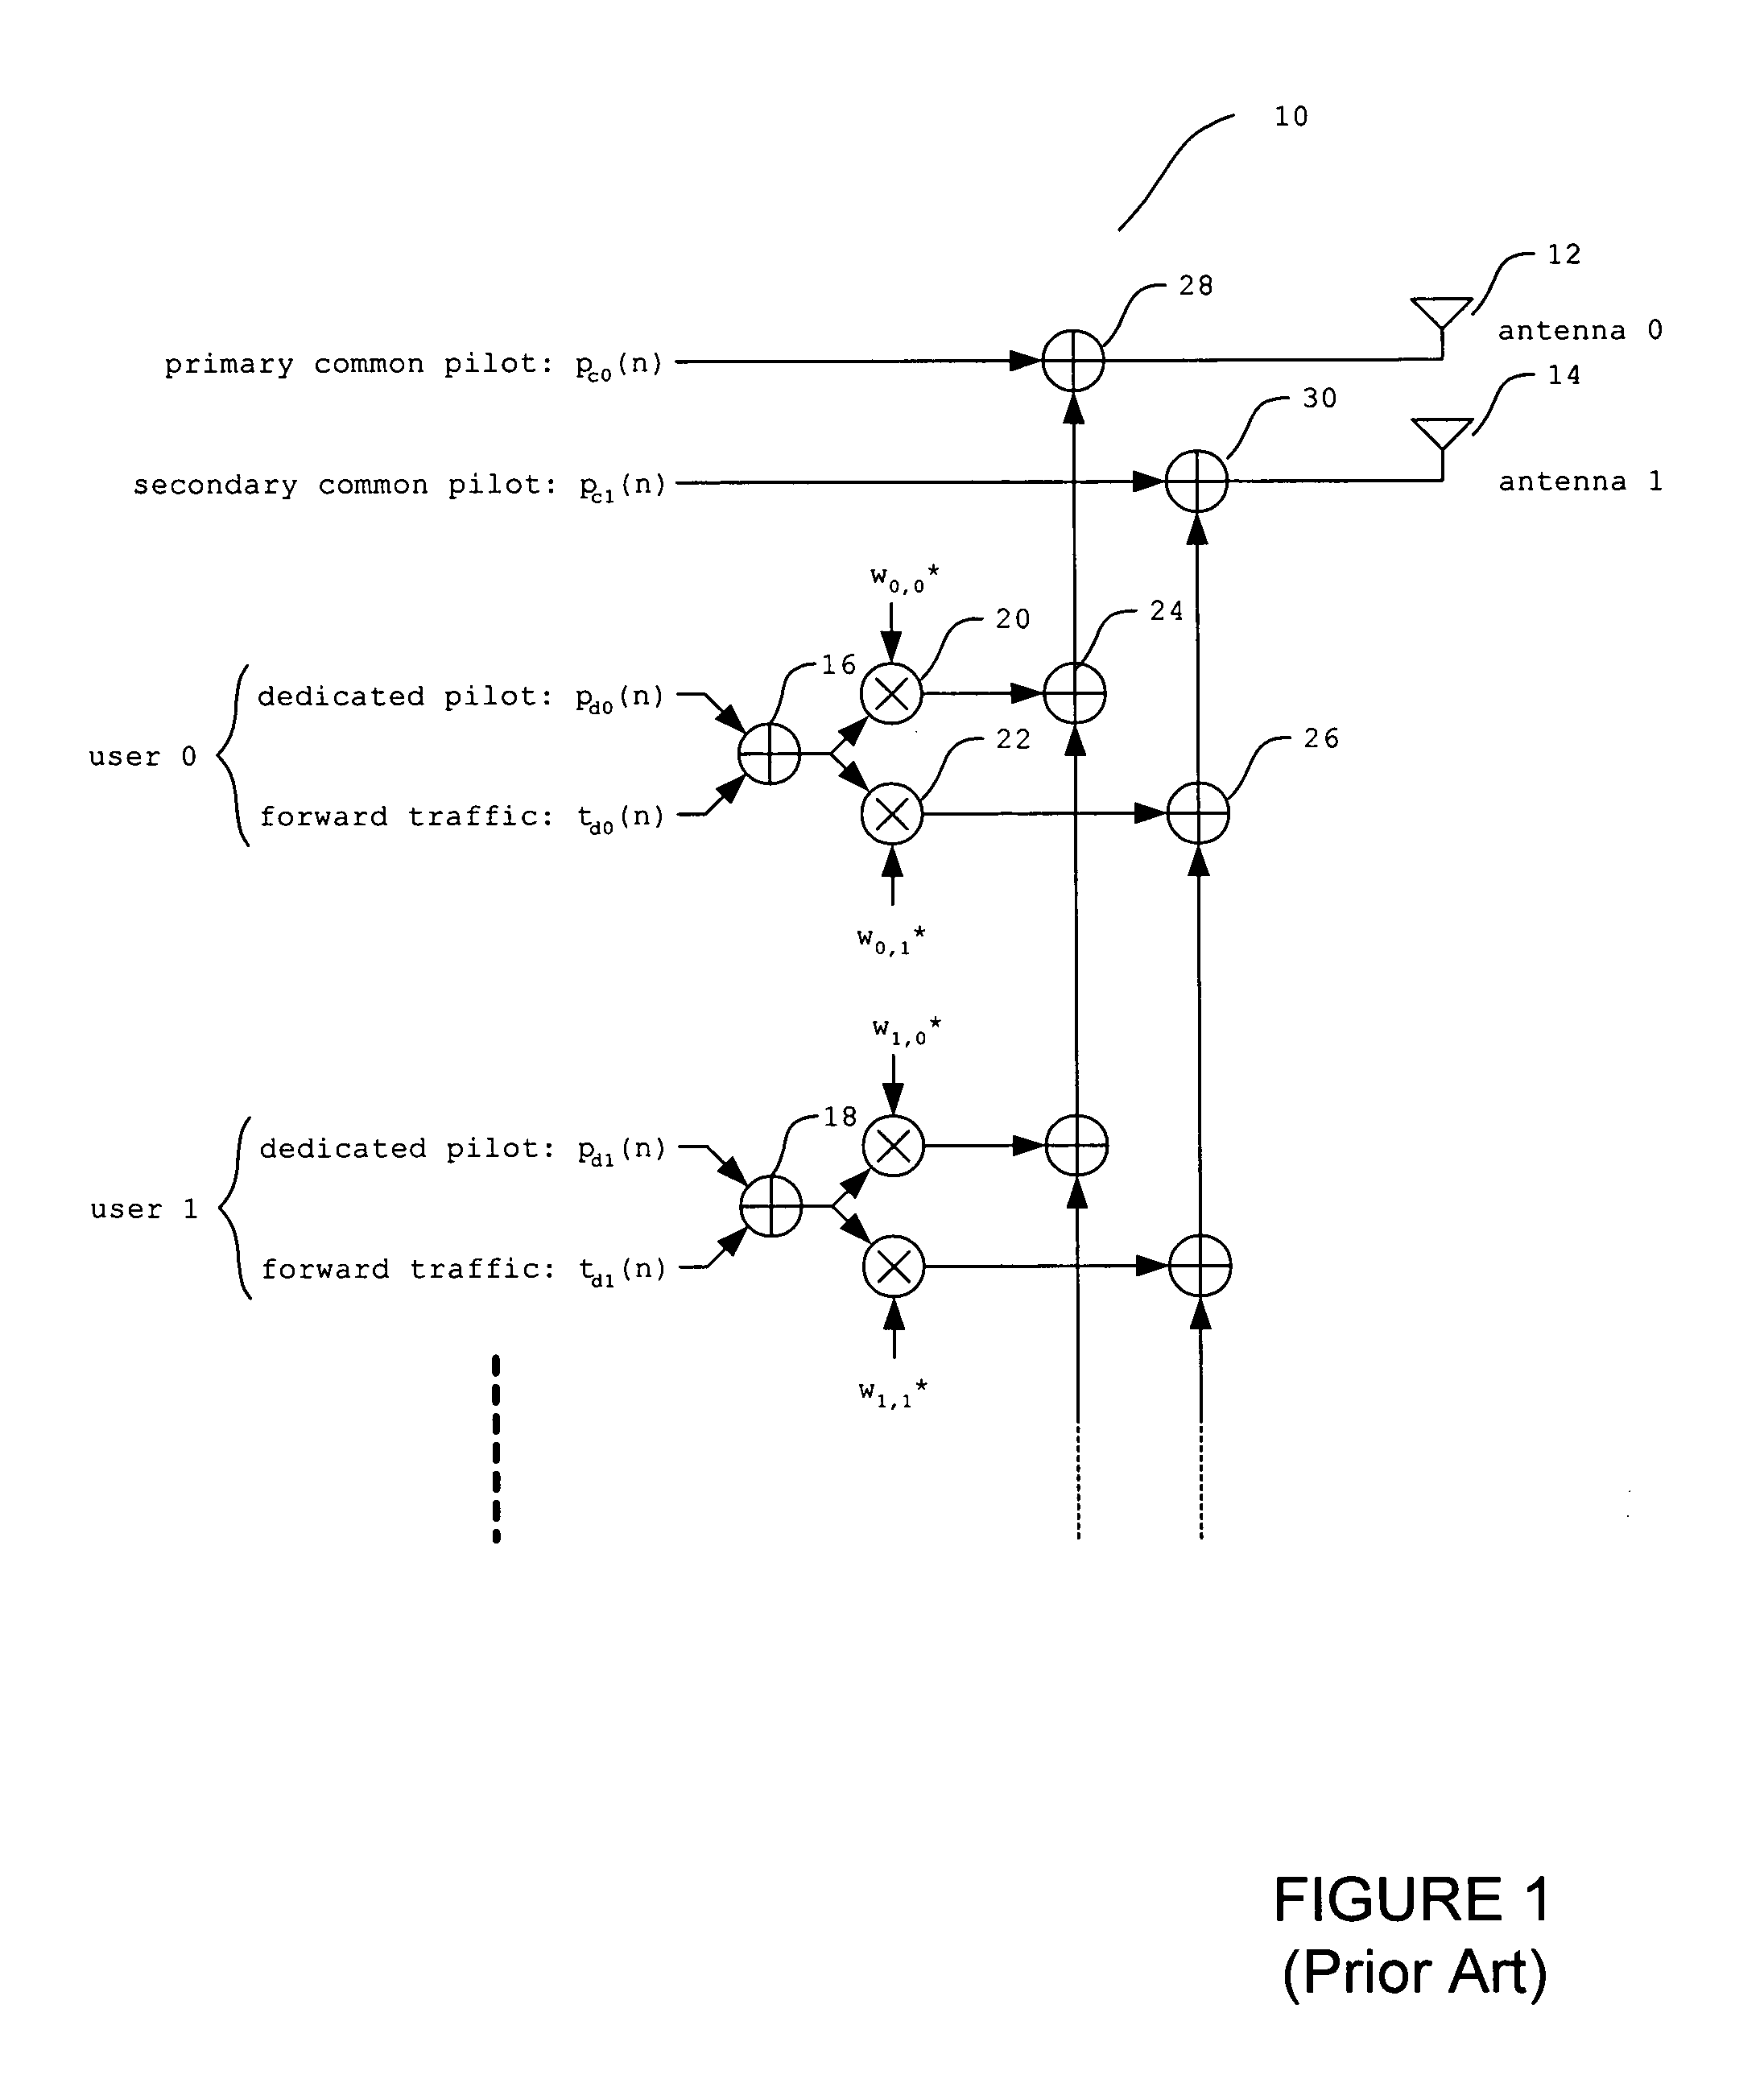 Method and apparatus for improving transmit antenna weight tracking using channel correlations in a wireless communication system